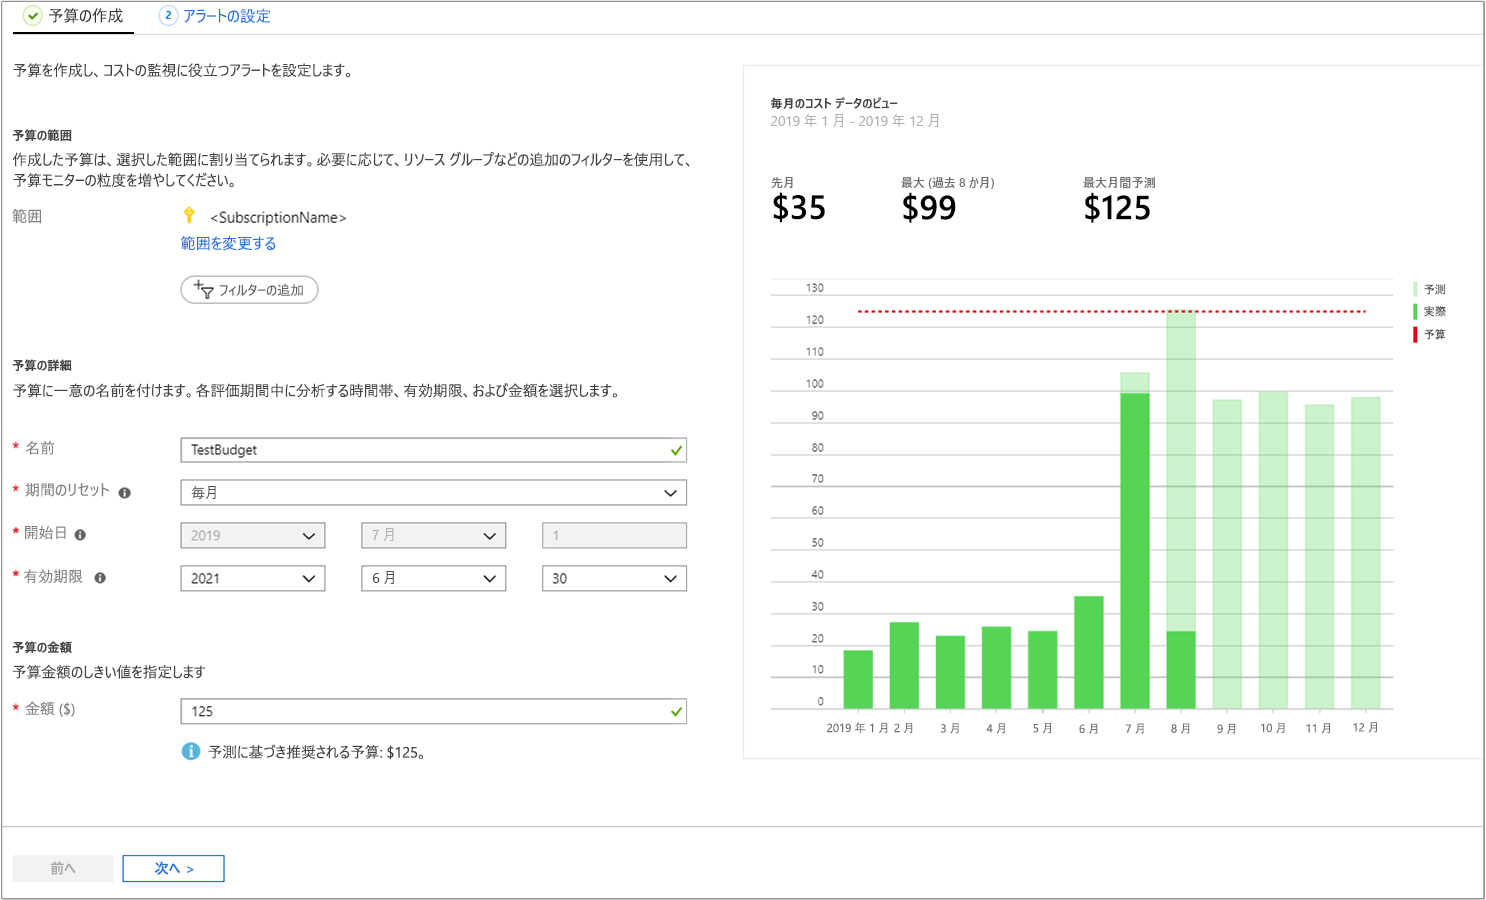 Screenshot of budget creation with monthly cost data.